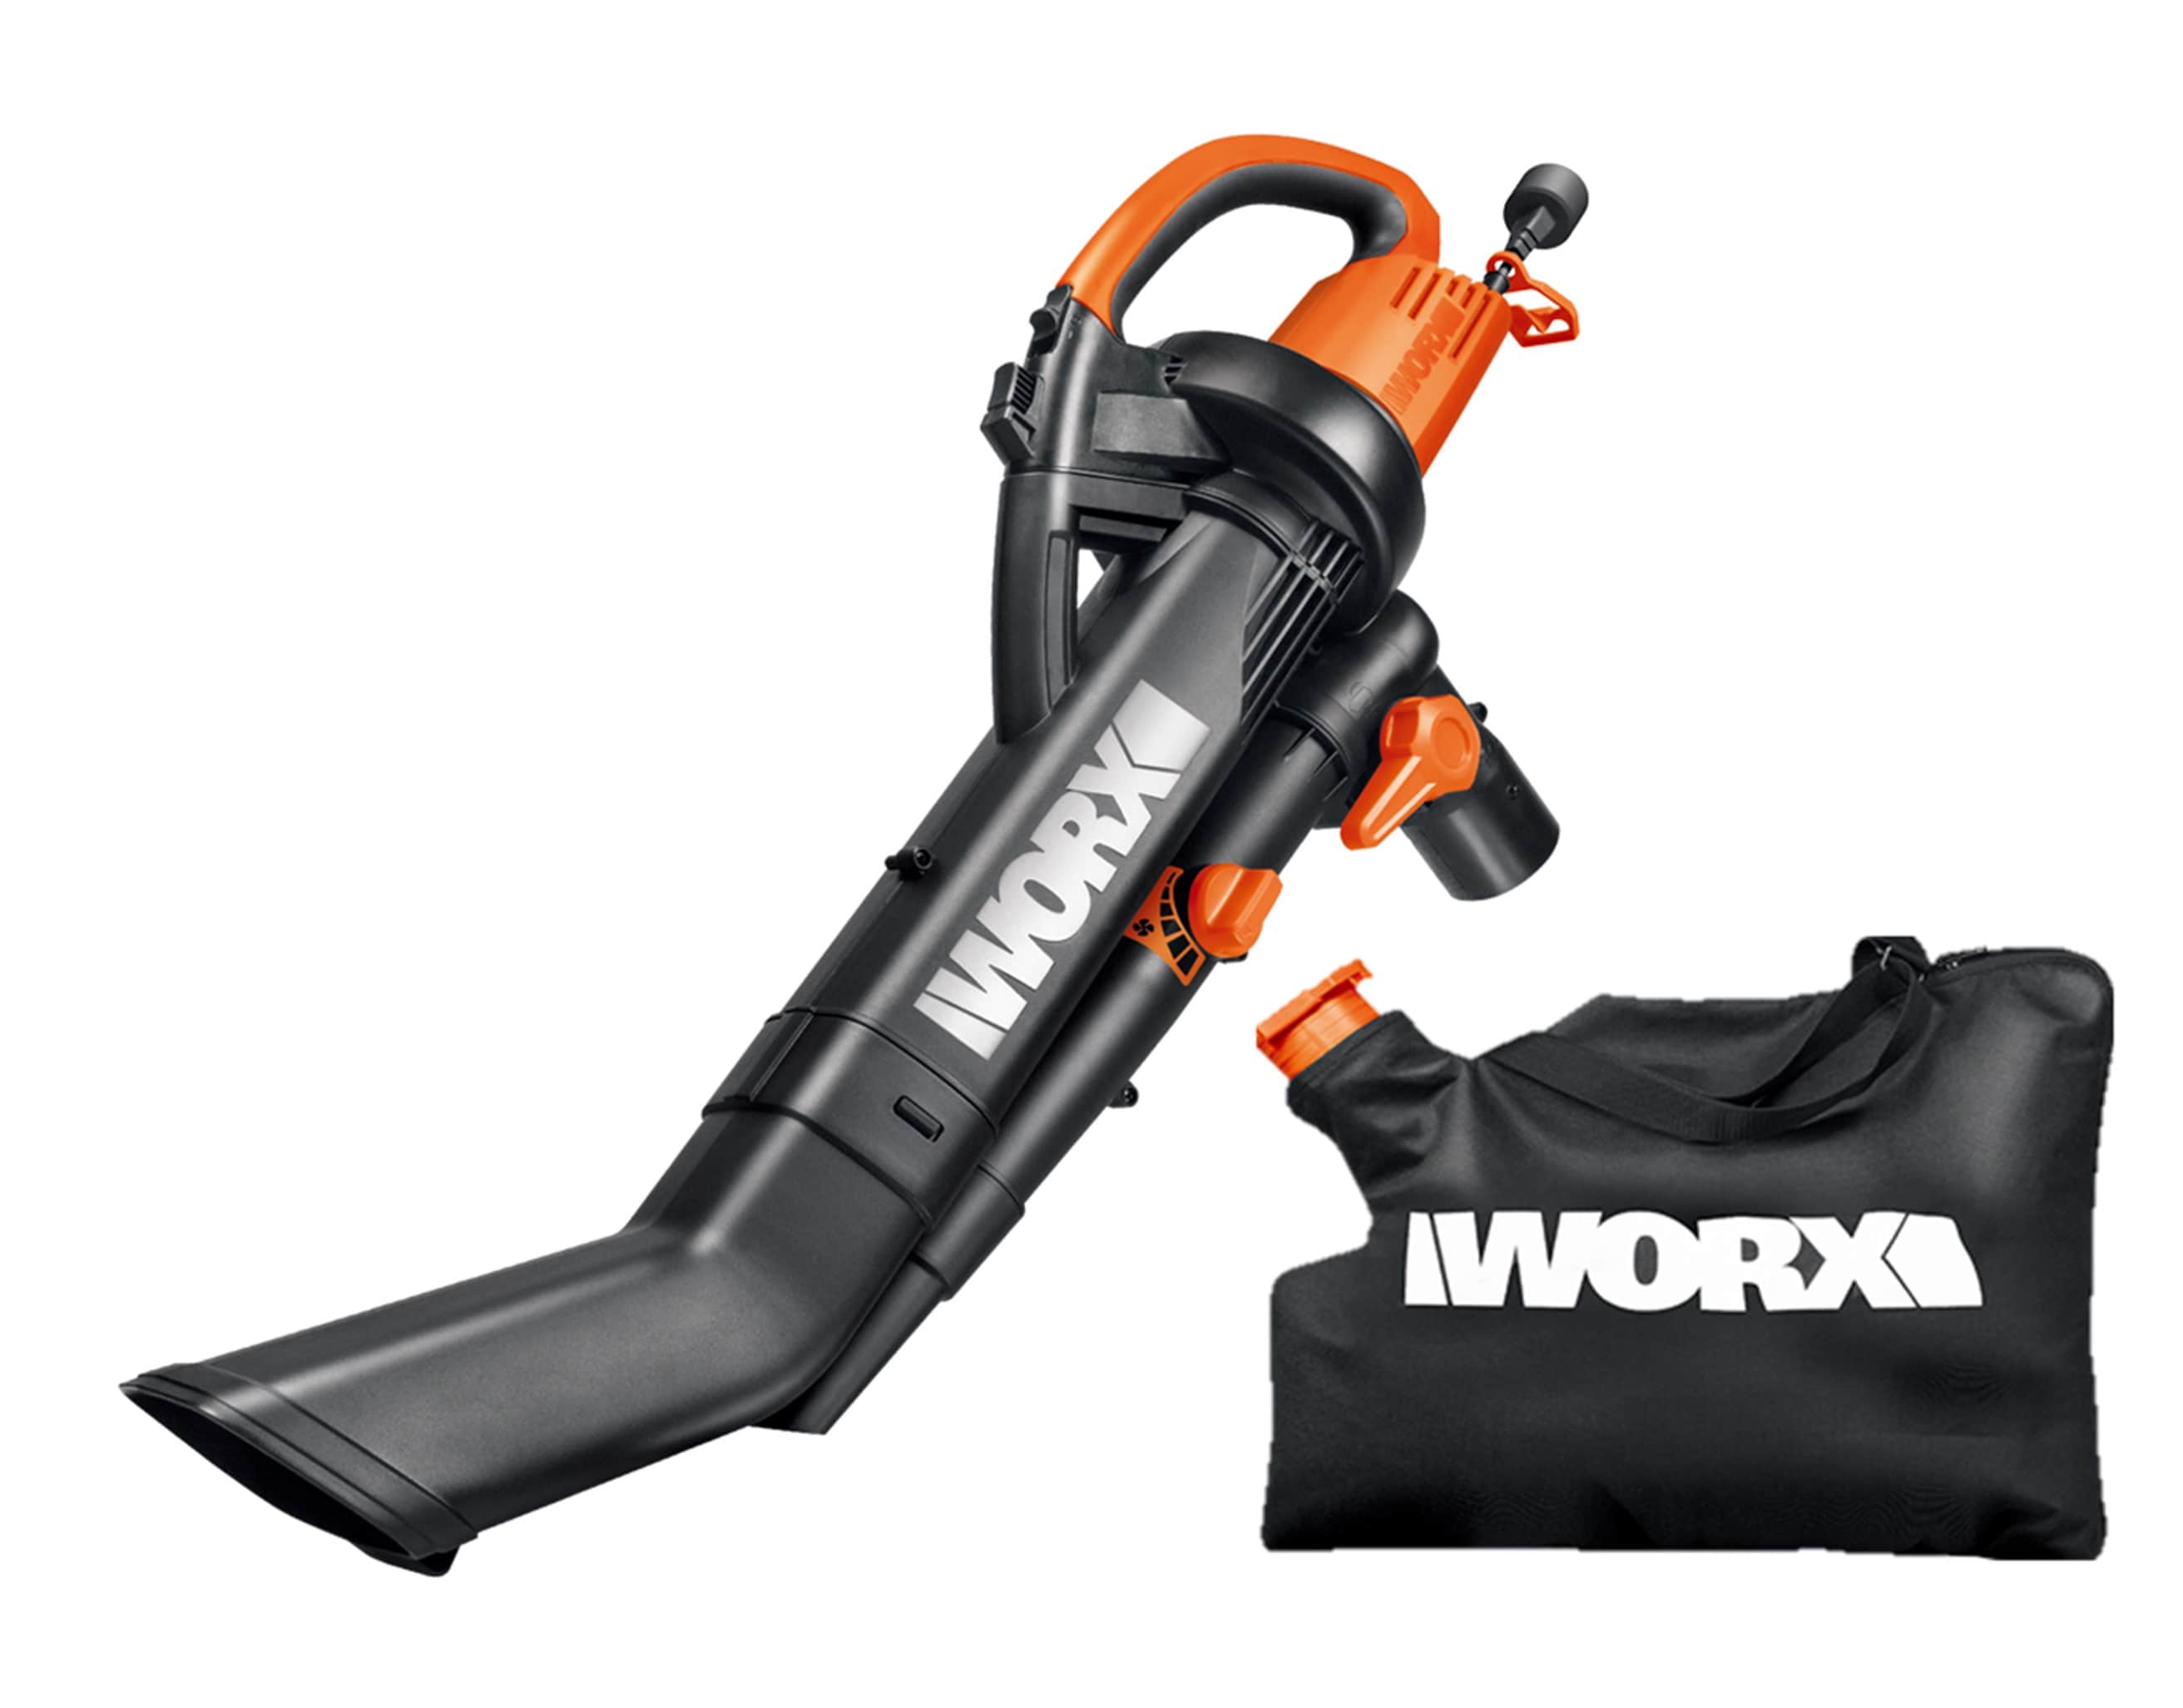 Image of Worx corded leaf blower cleaning up yard